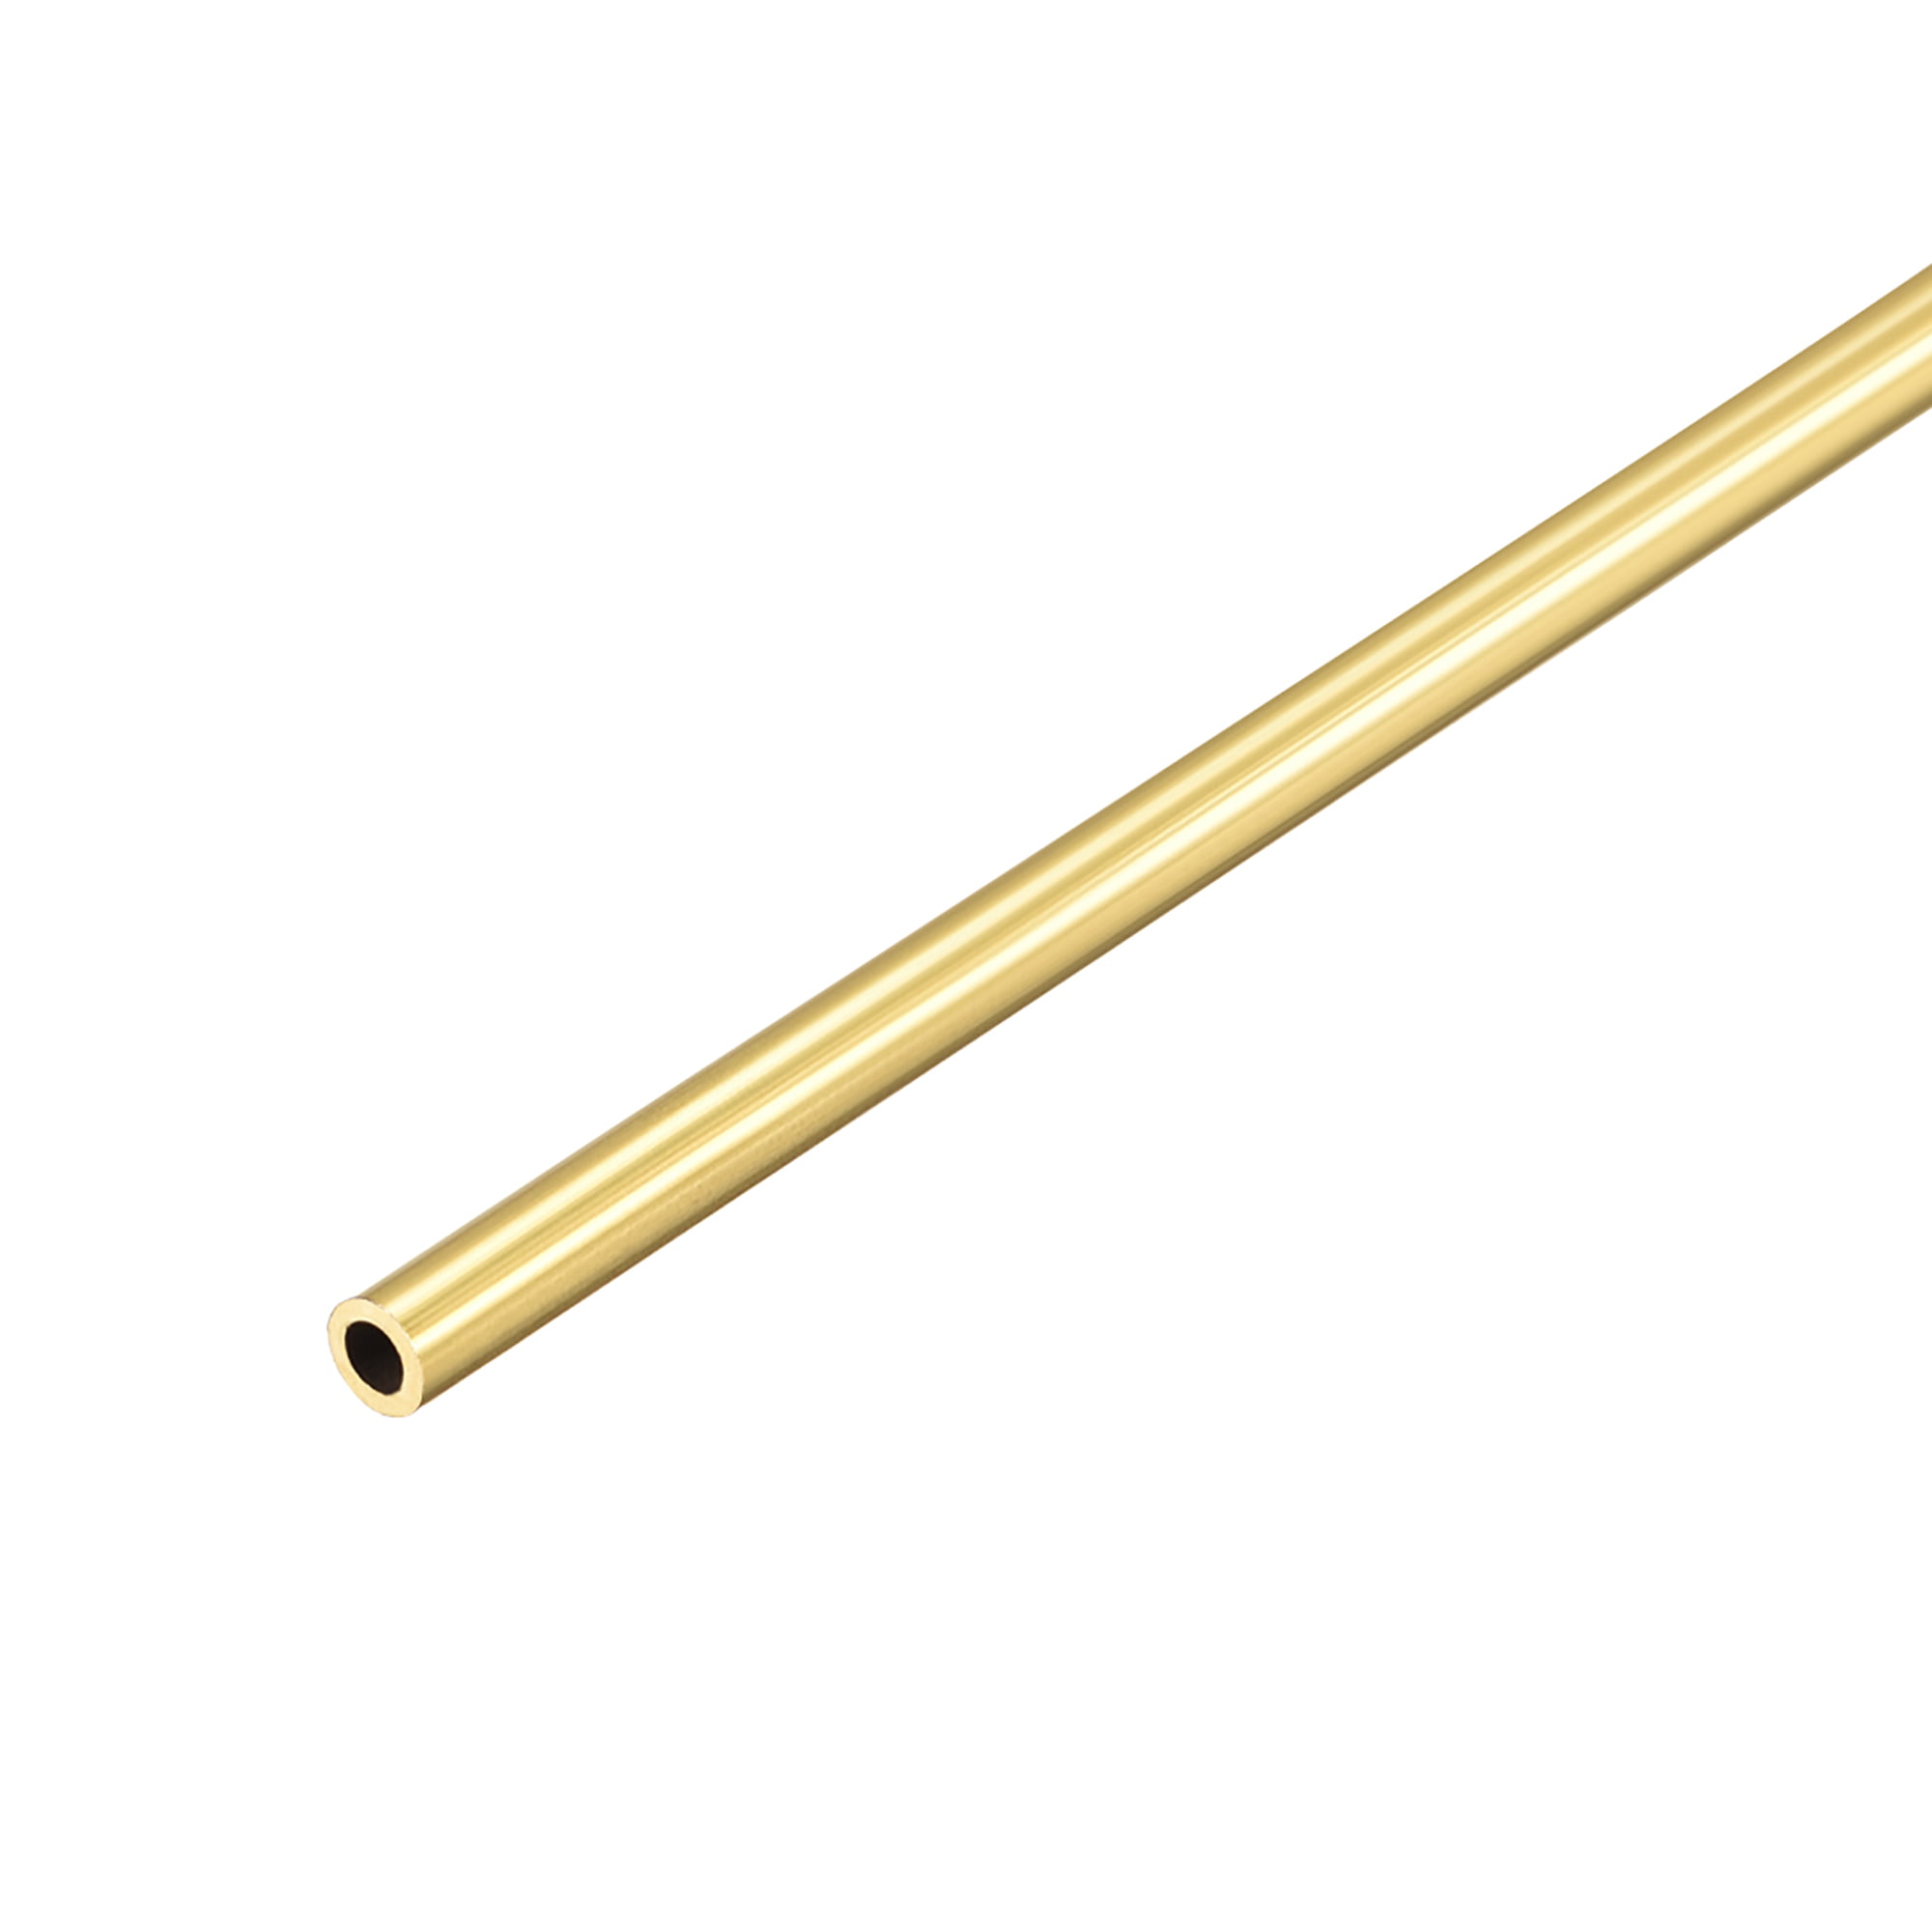 Brass Round Tube 2.5mm OD 0.5mm Wall Thickness 300mm Length Seamless 2.5 Mm Od Tubing